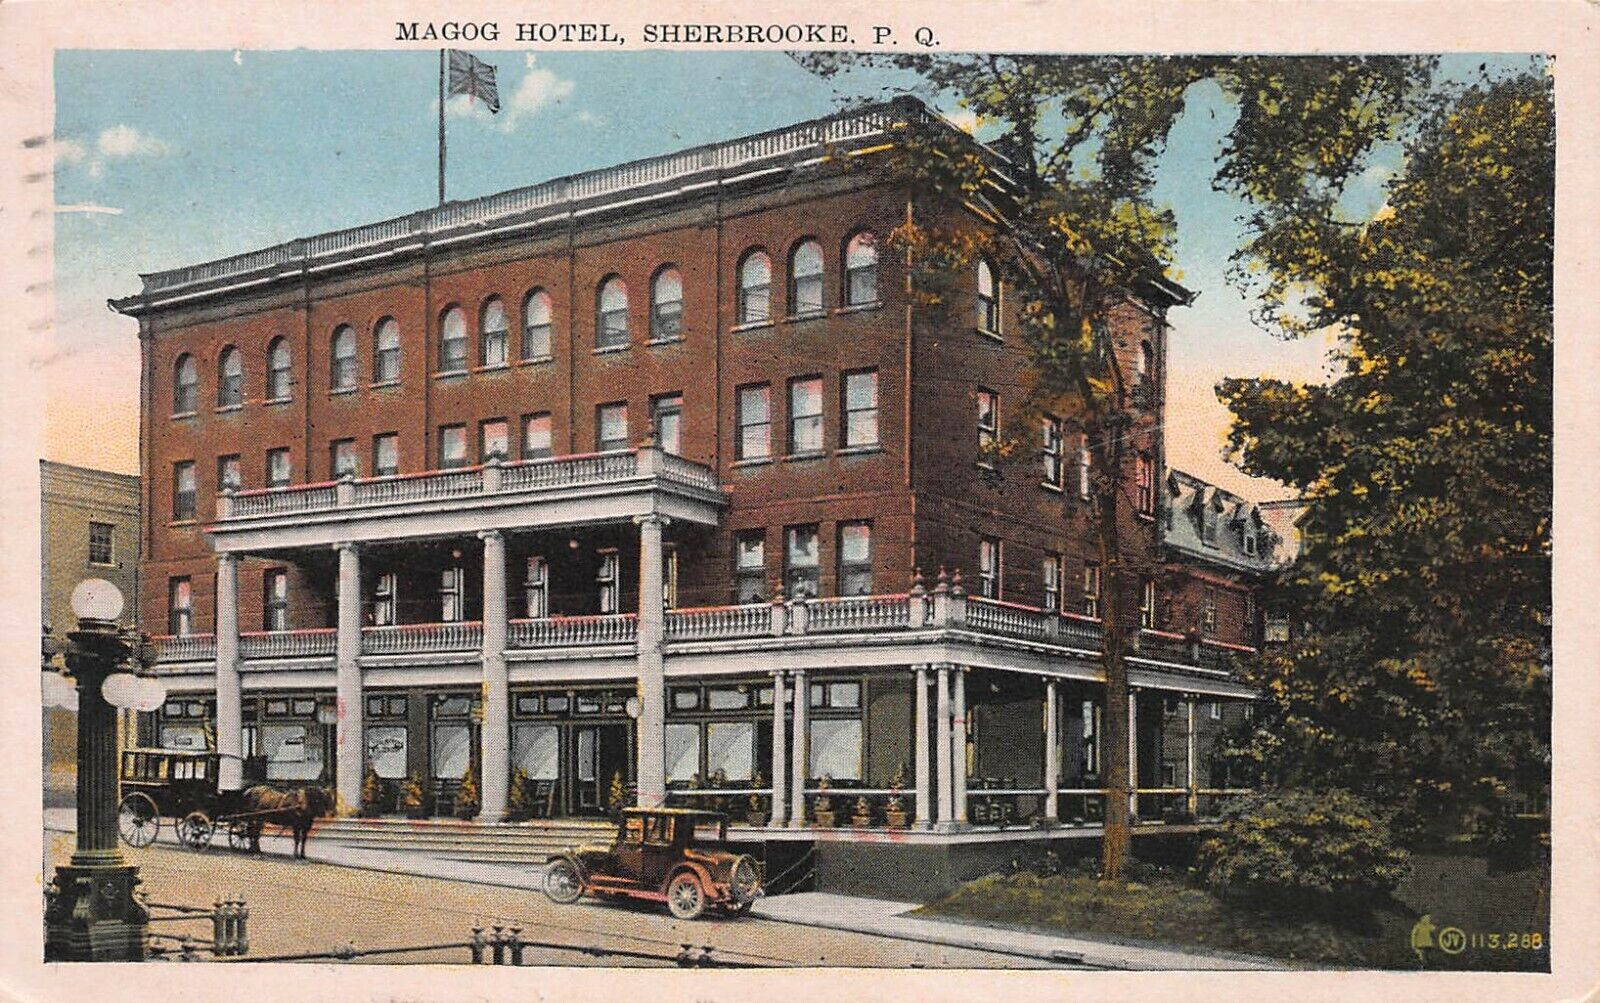 Magog Hotel, Sherbrooke, Quebec, Canada, Early Postcard, Used in 1929